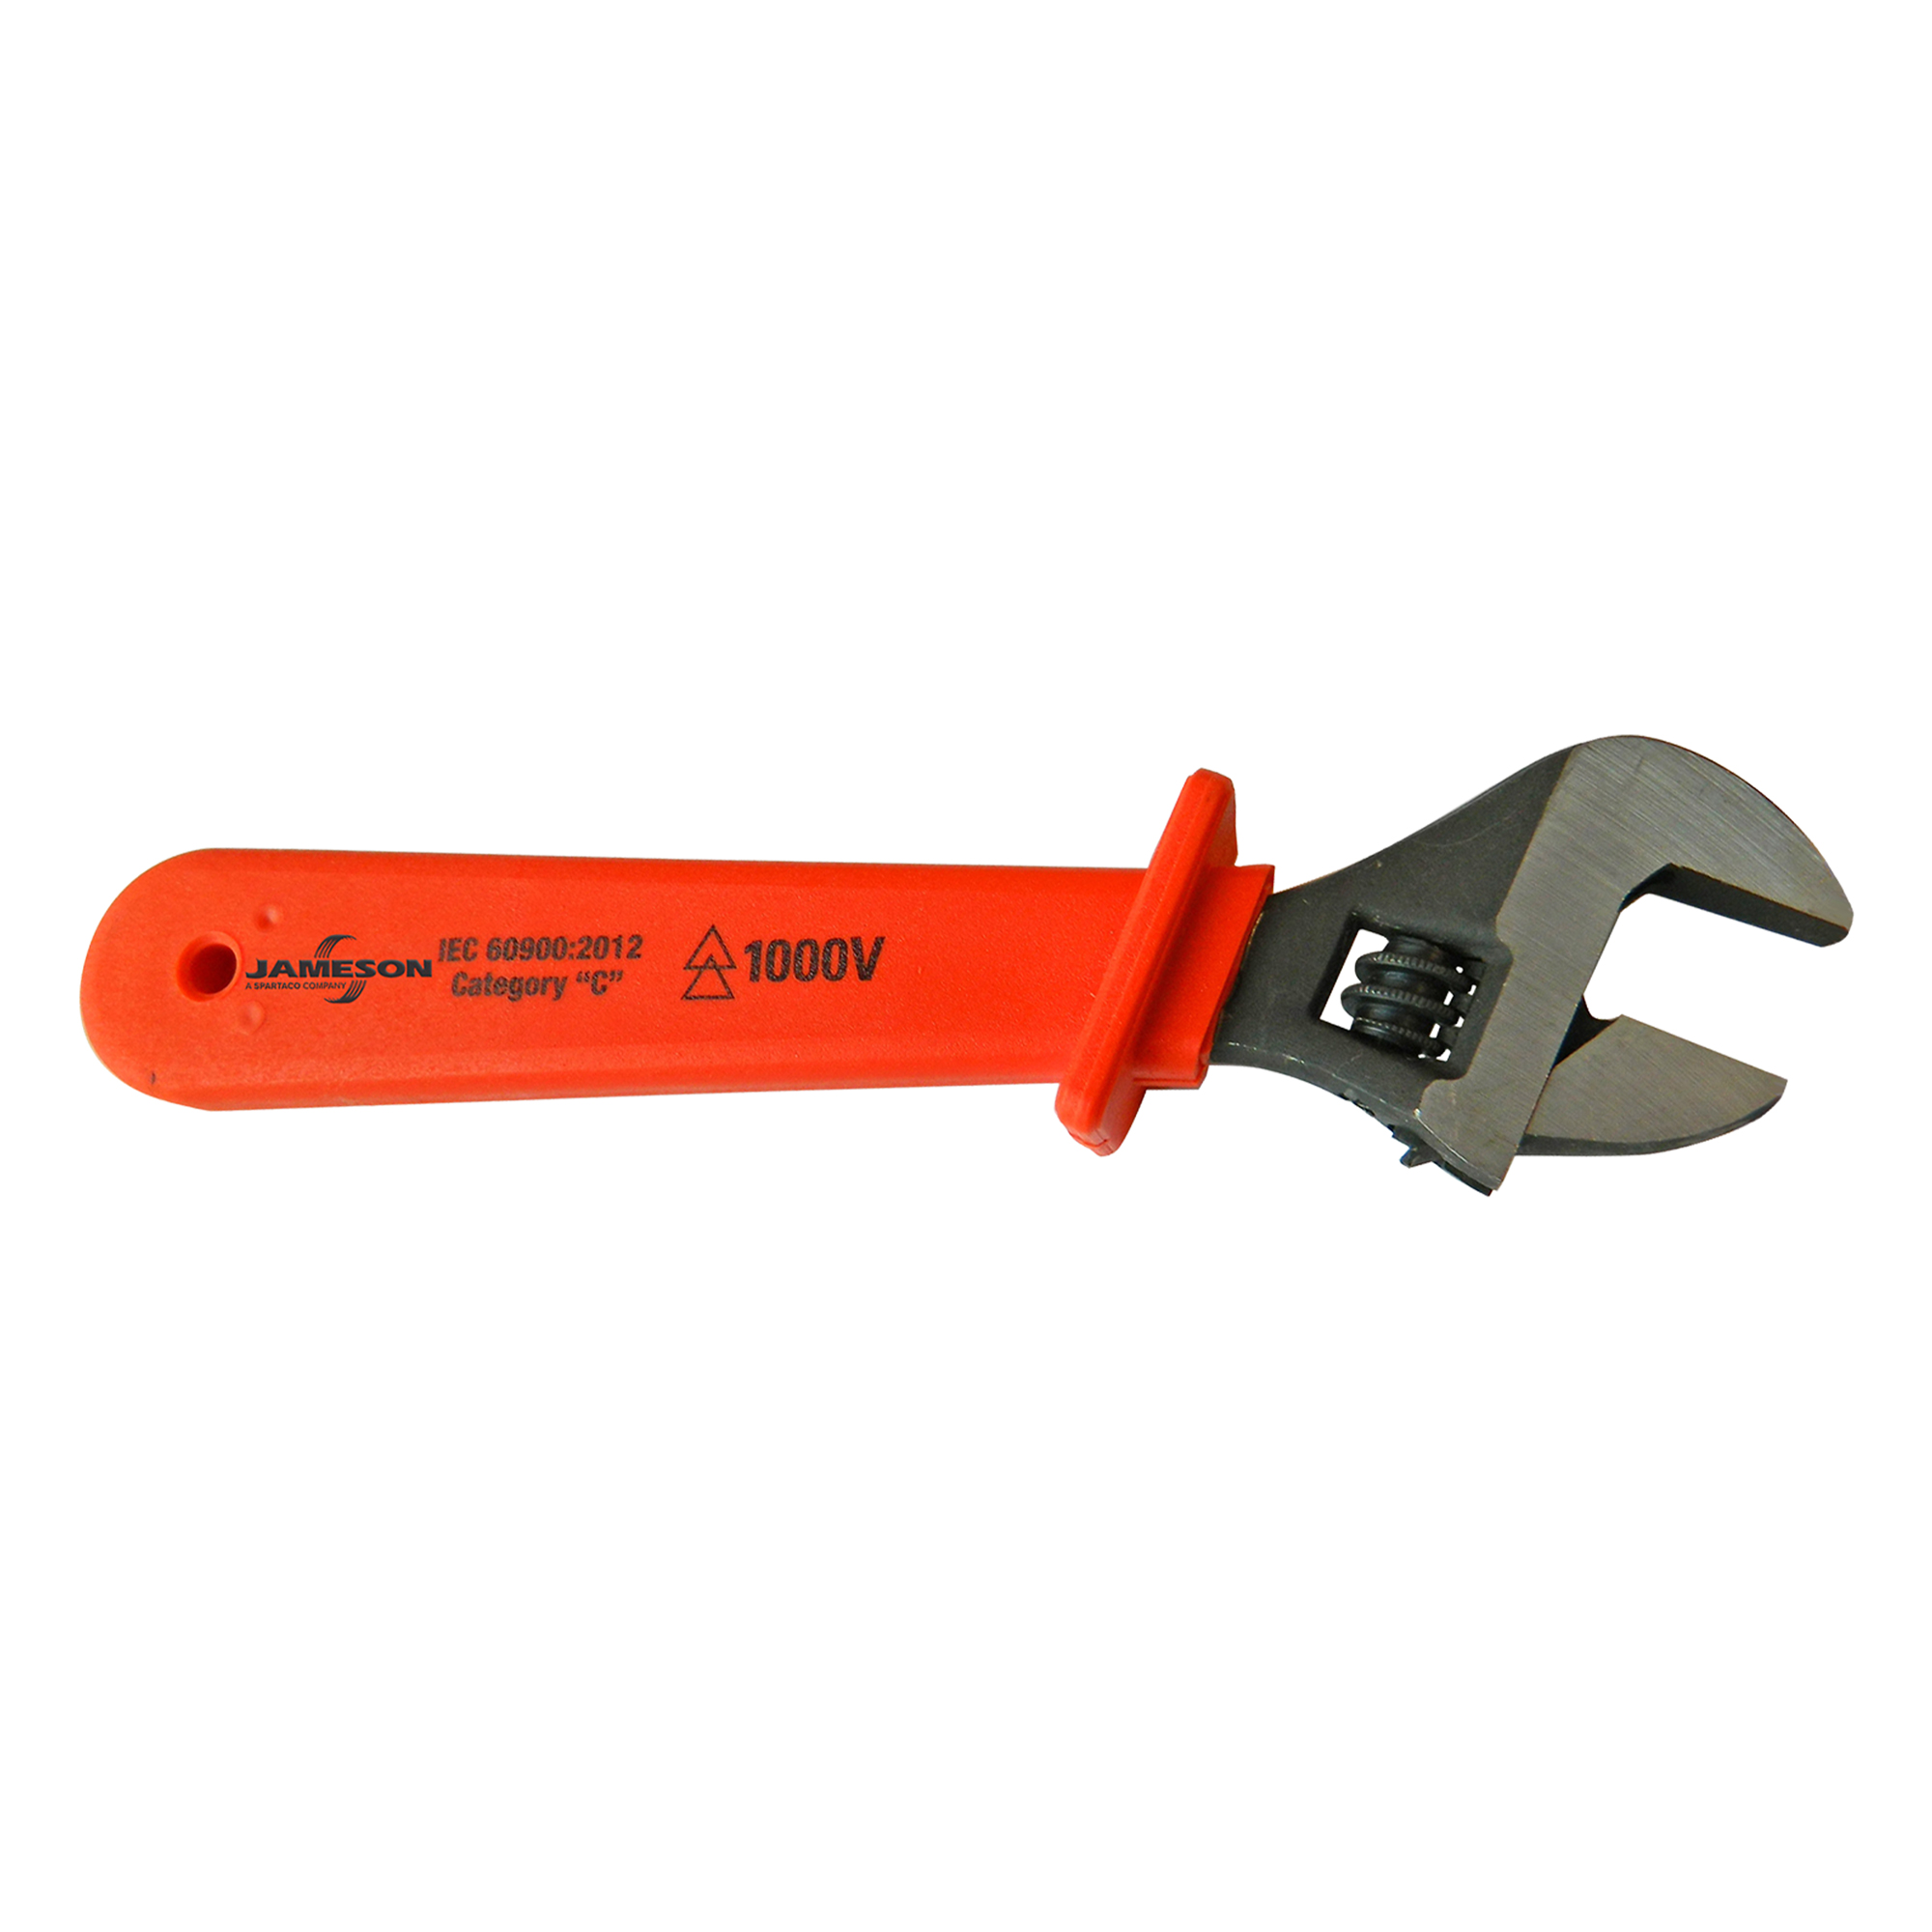 Jameson JT-WR-07053 1000V Ratcheting Box Wrench Insulated Hand Tool 9/16 inch 